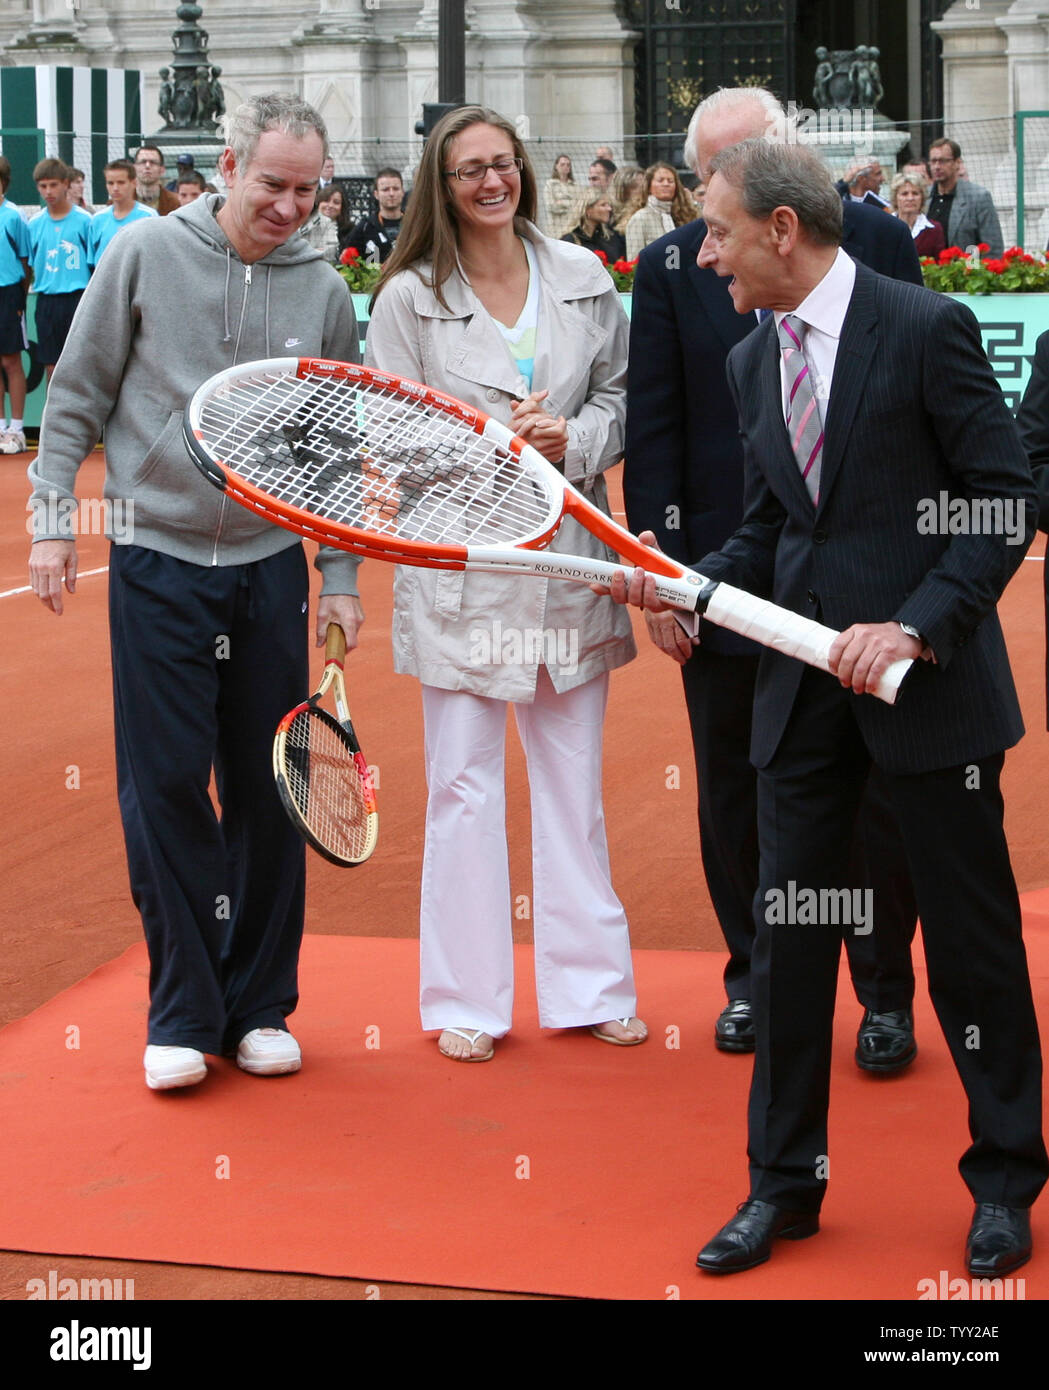 (From L to R) Tennis greats John McEnroe and Mary Pierce, President of the French Tennis Federation Christian Bimes (behind) and Mayor of Paris Bertrand Delanoe arrive on a clay court set up in front of the Hotel de Ville (city hall) during the launch of the exhibition 'Roland Garros in the City' in Paris on June 4, 2008.  The event coincides with the French Open tennis tournament taking place this week in Paris.   (UPI Photo/ David Silpa) Stock Photo